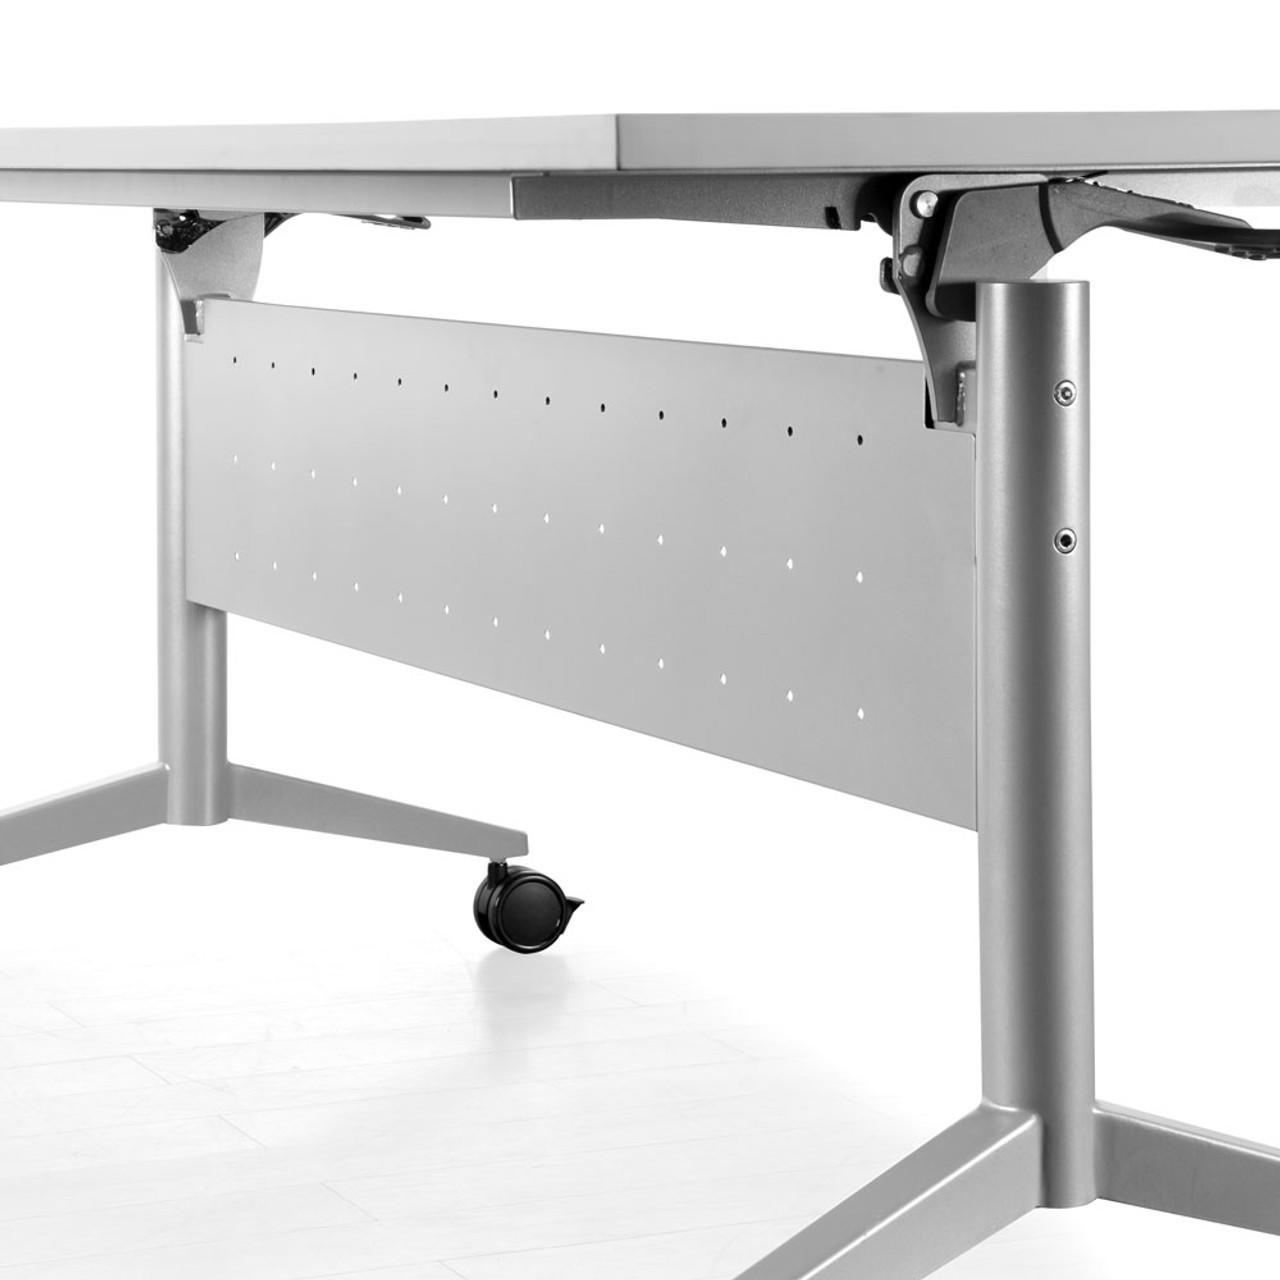  Office Source 72x24 Flip Top Nesting Table 